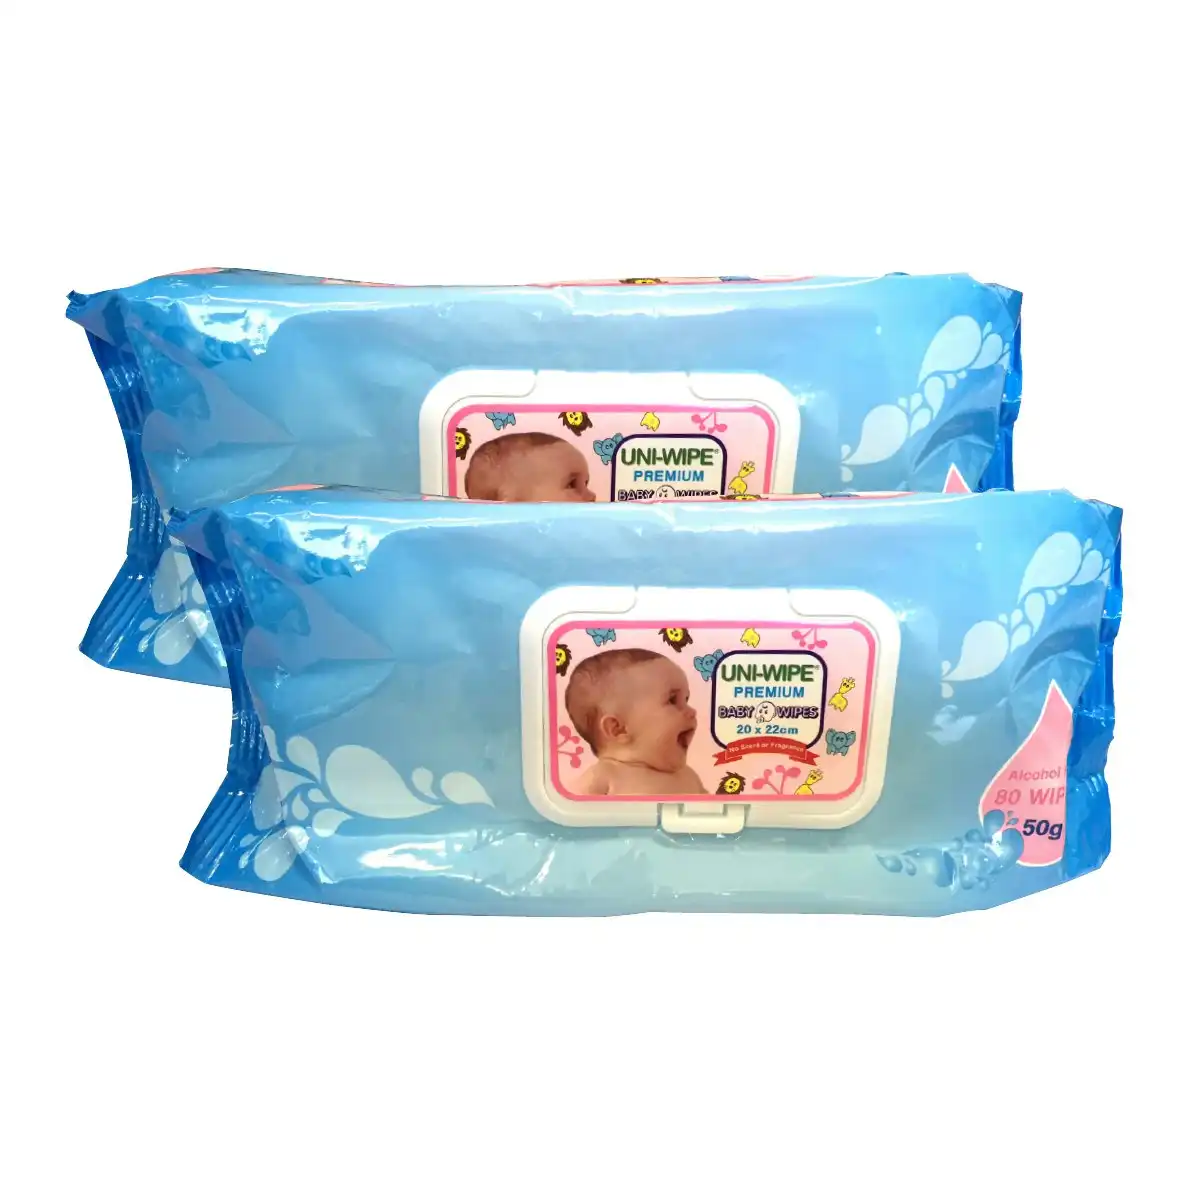 Uni-Wipe Baby Wipes Unscented, 22x20cm, 50 GSM Thick, Alcohol-Free, 80 Wipes in Soft Pack with Hard Secure Lid, 12 Packs/Carton